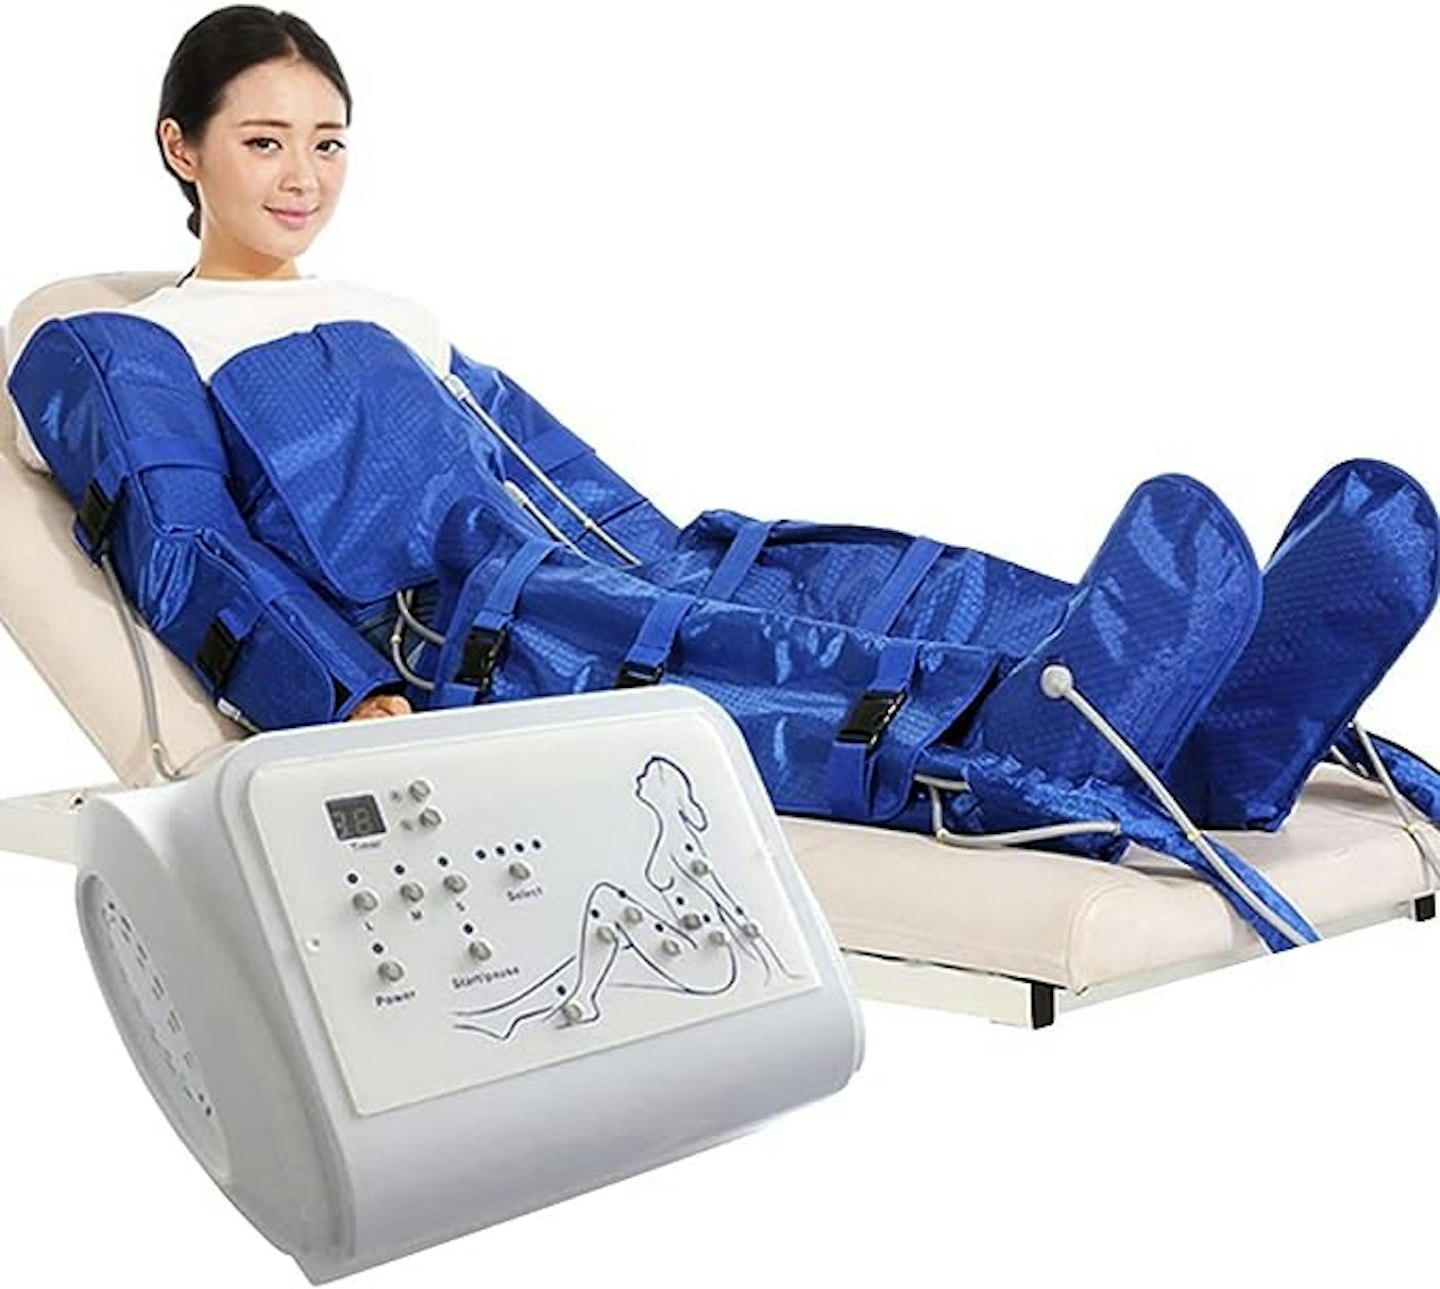 ZRZJBX Air Wave Pressure Lymphatic Drainage Vacuum Therapy